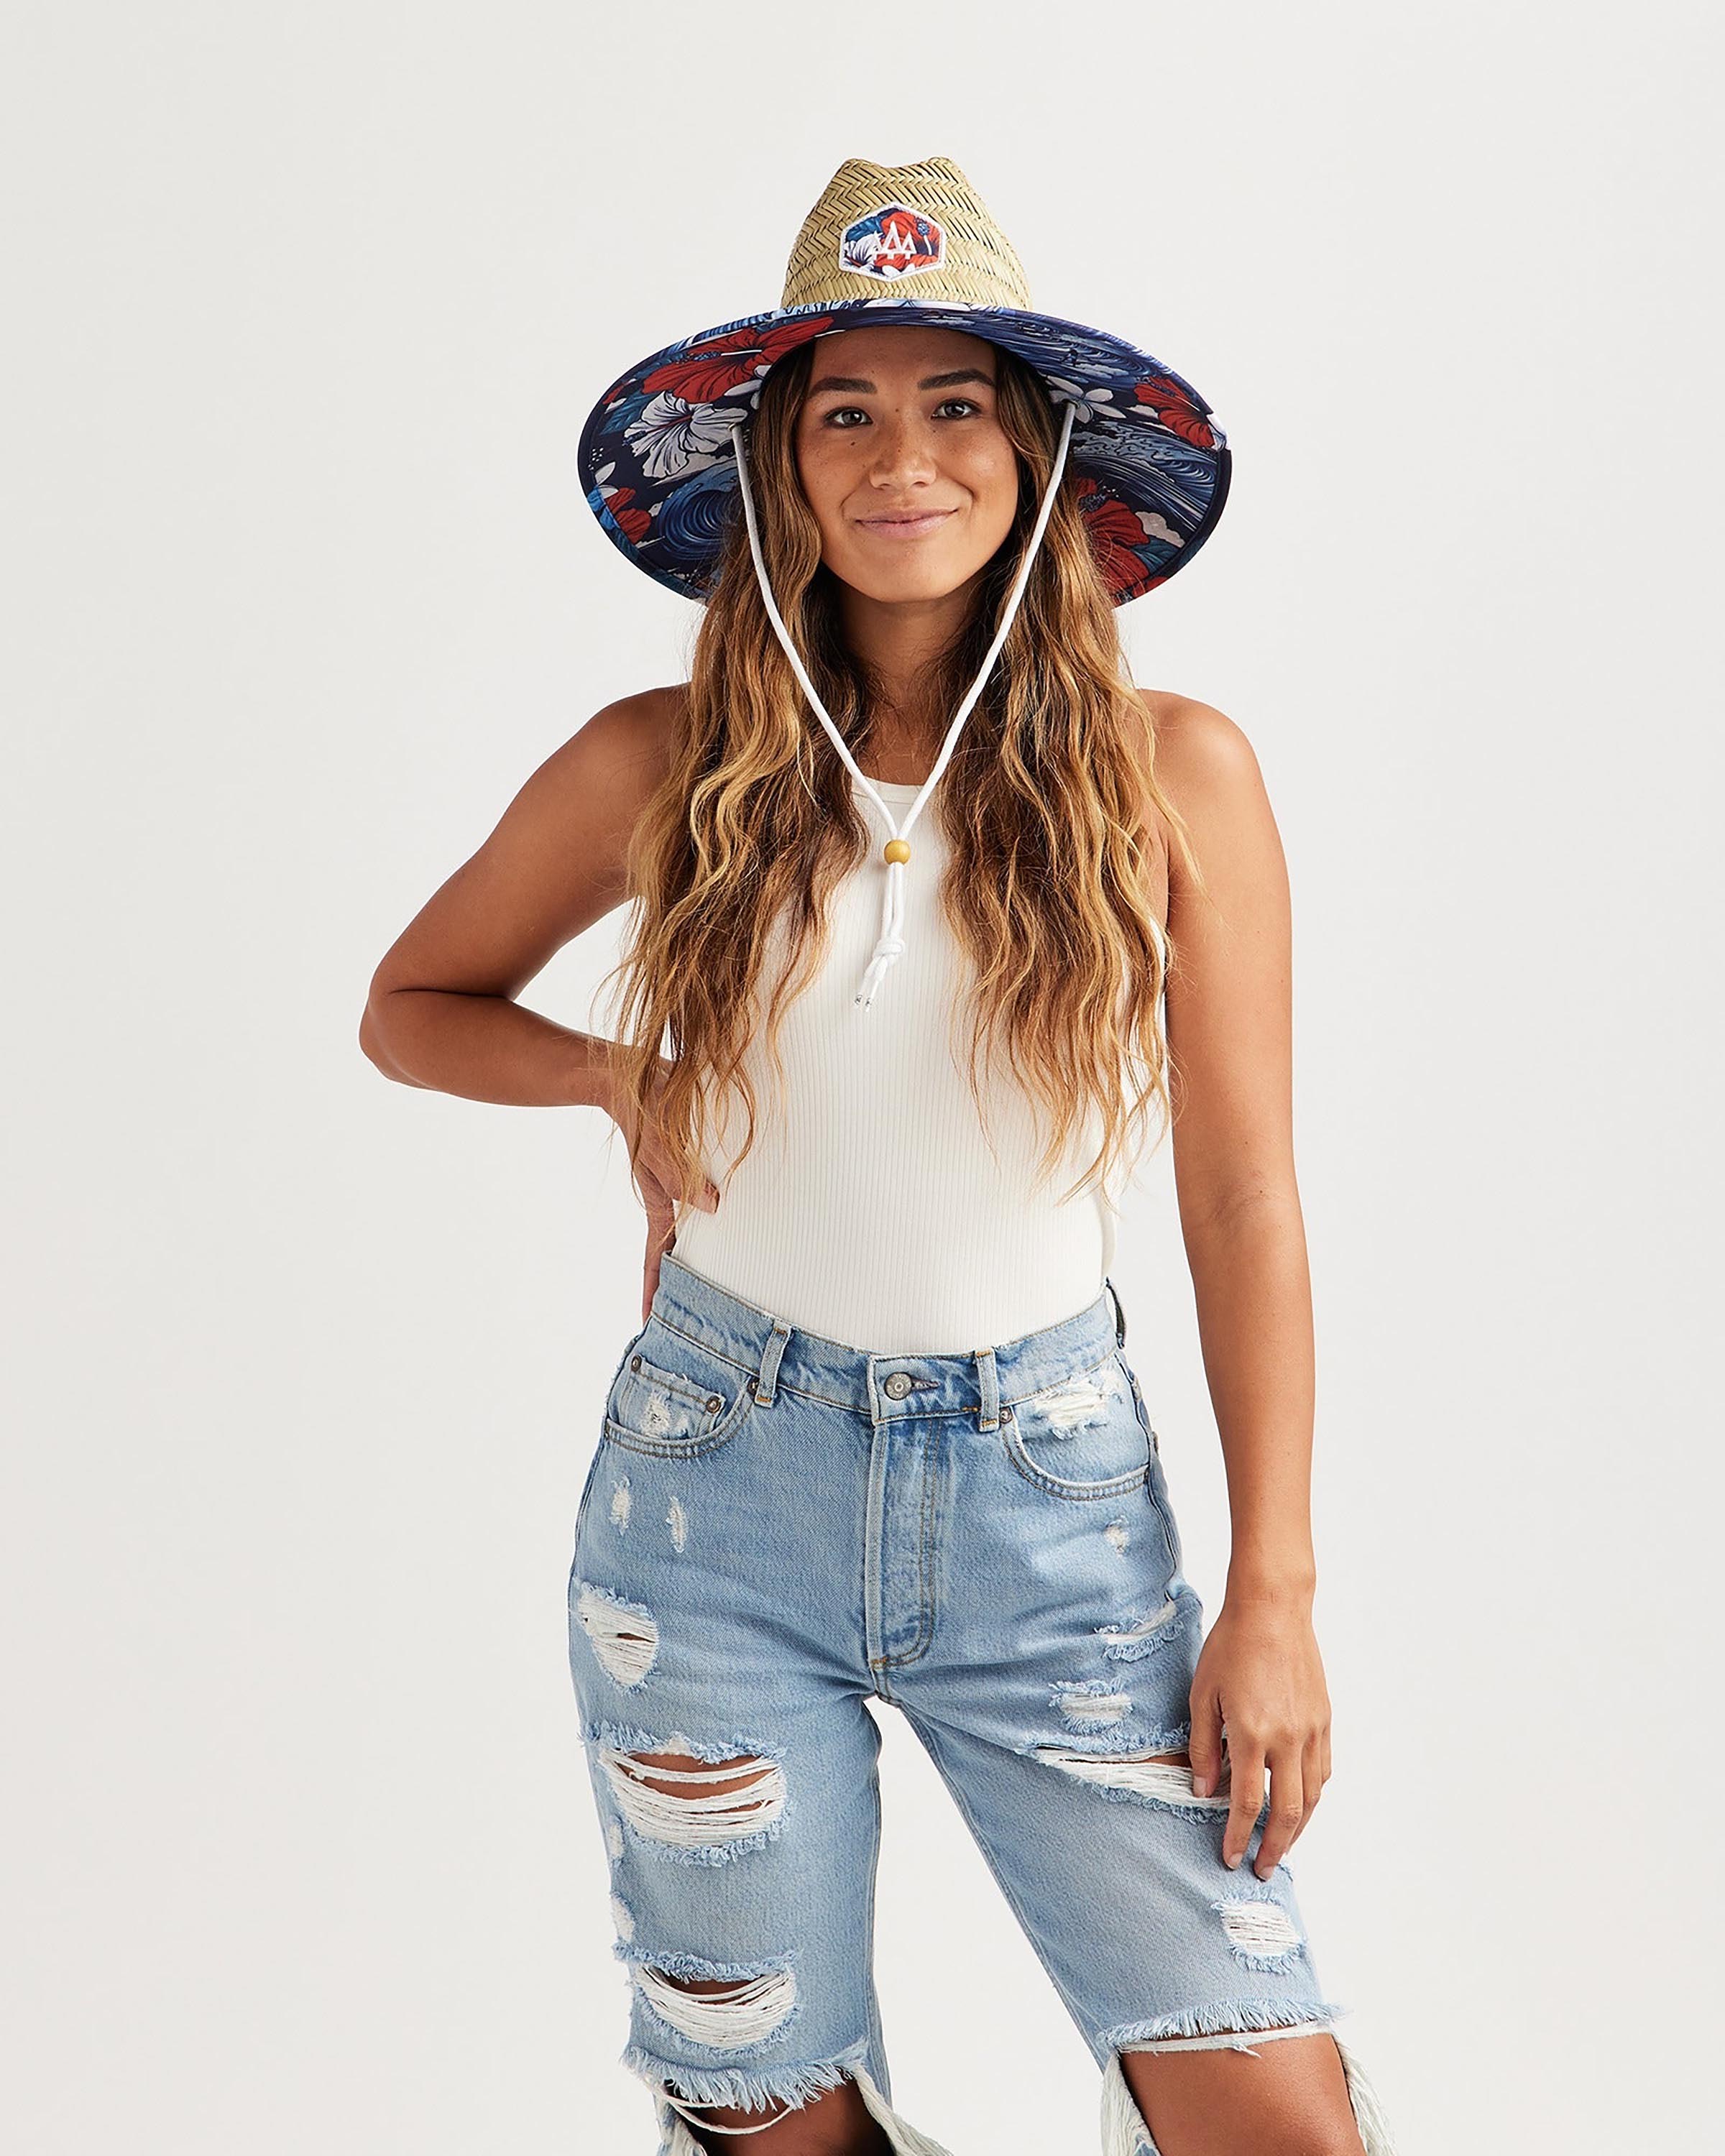 Hemlock female model looking straight wearing Midway straw lifeguard hat with USA floral pattern